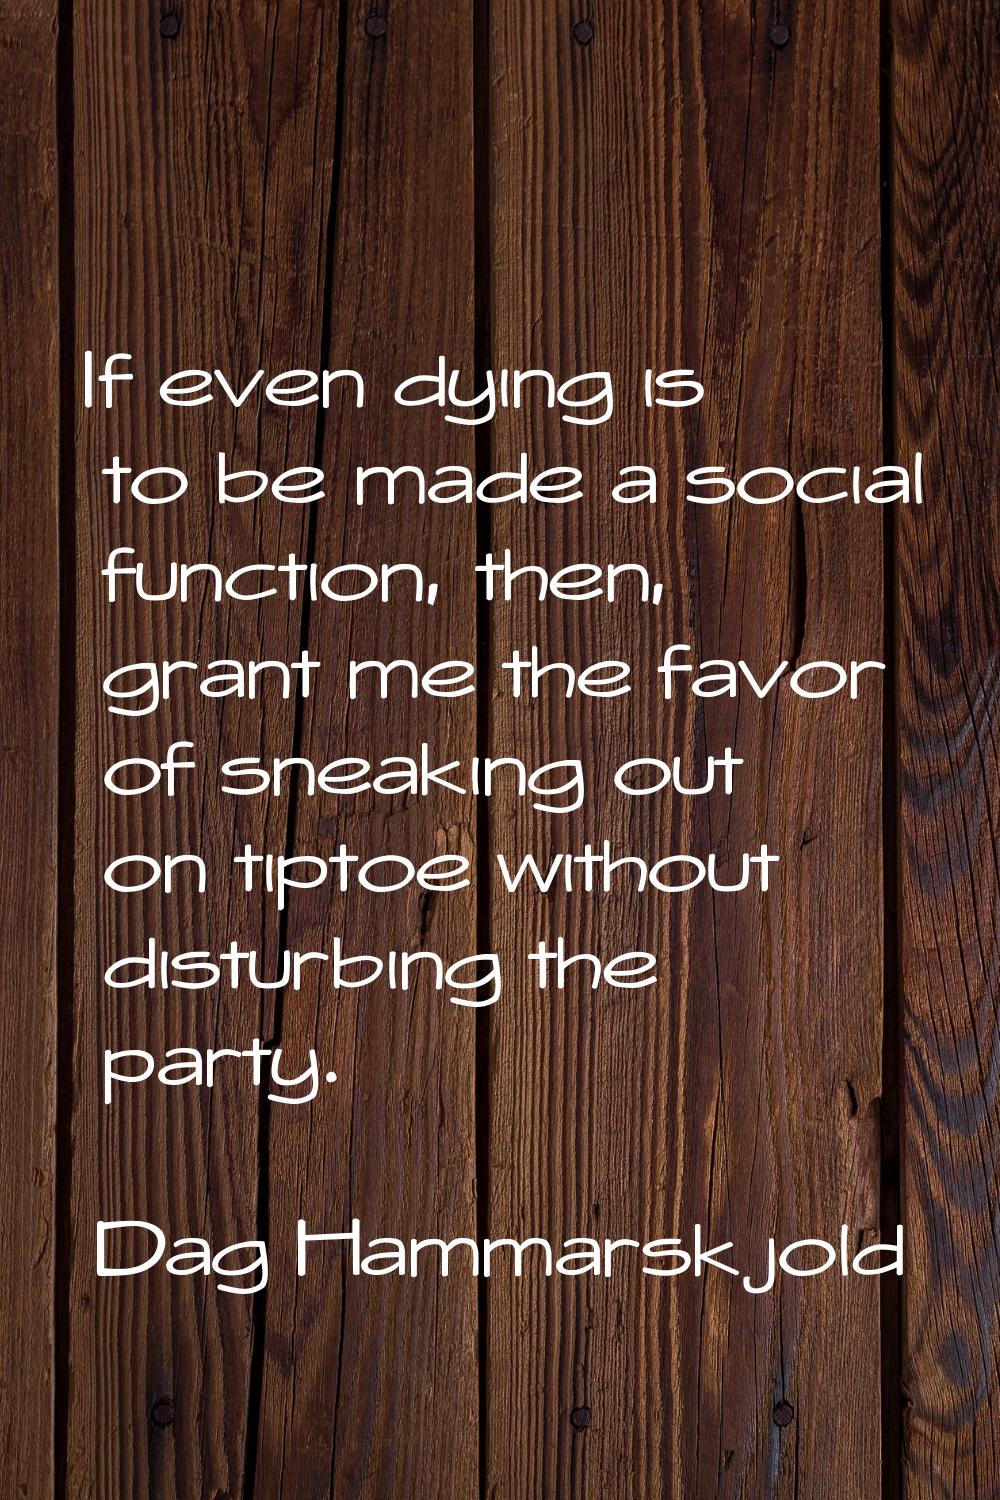 If even dying is to be made a social function, then, grant me the favor of sneaking out on tiptoe w